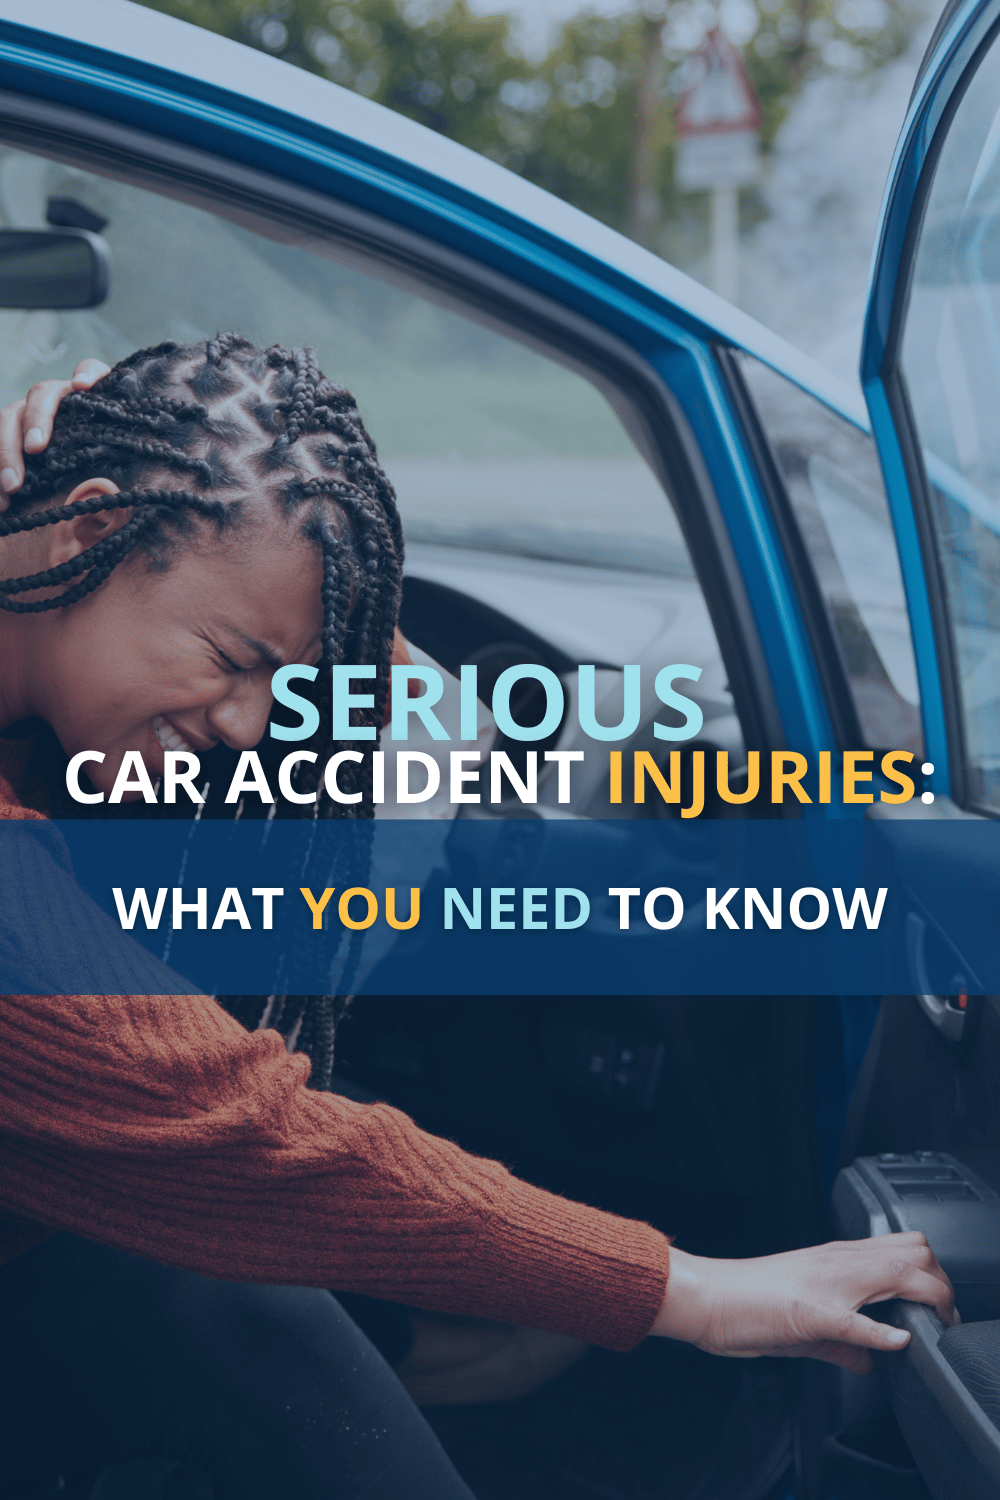 Serious Car Accident Injuries: Most Common & Legal Rights Explained